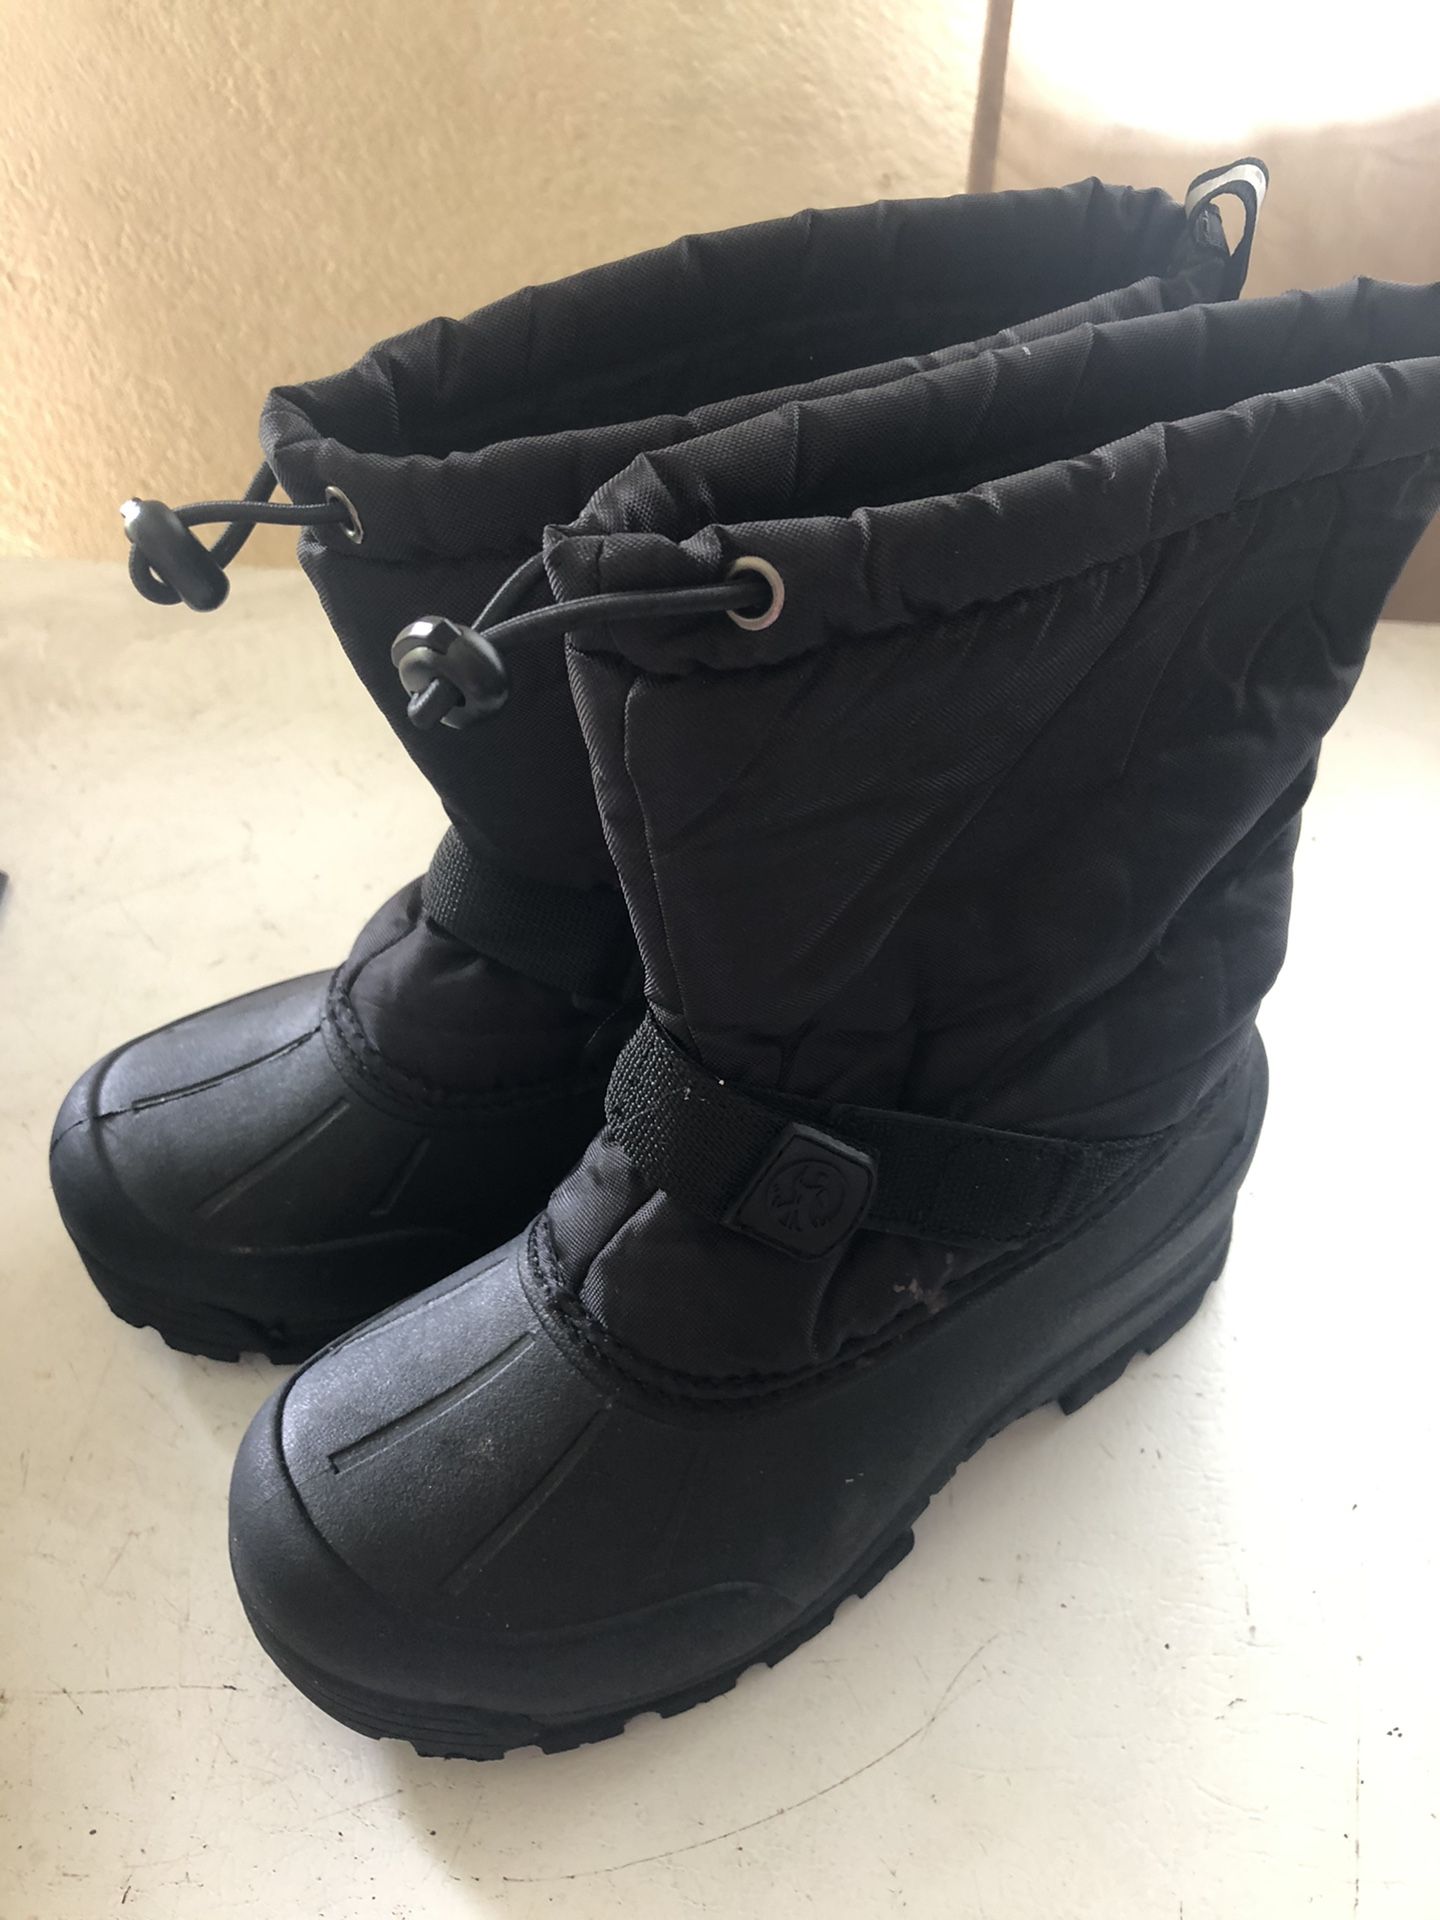 Snow boots for Kids Size 5, Boy Overall Size14/16